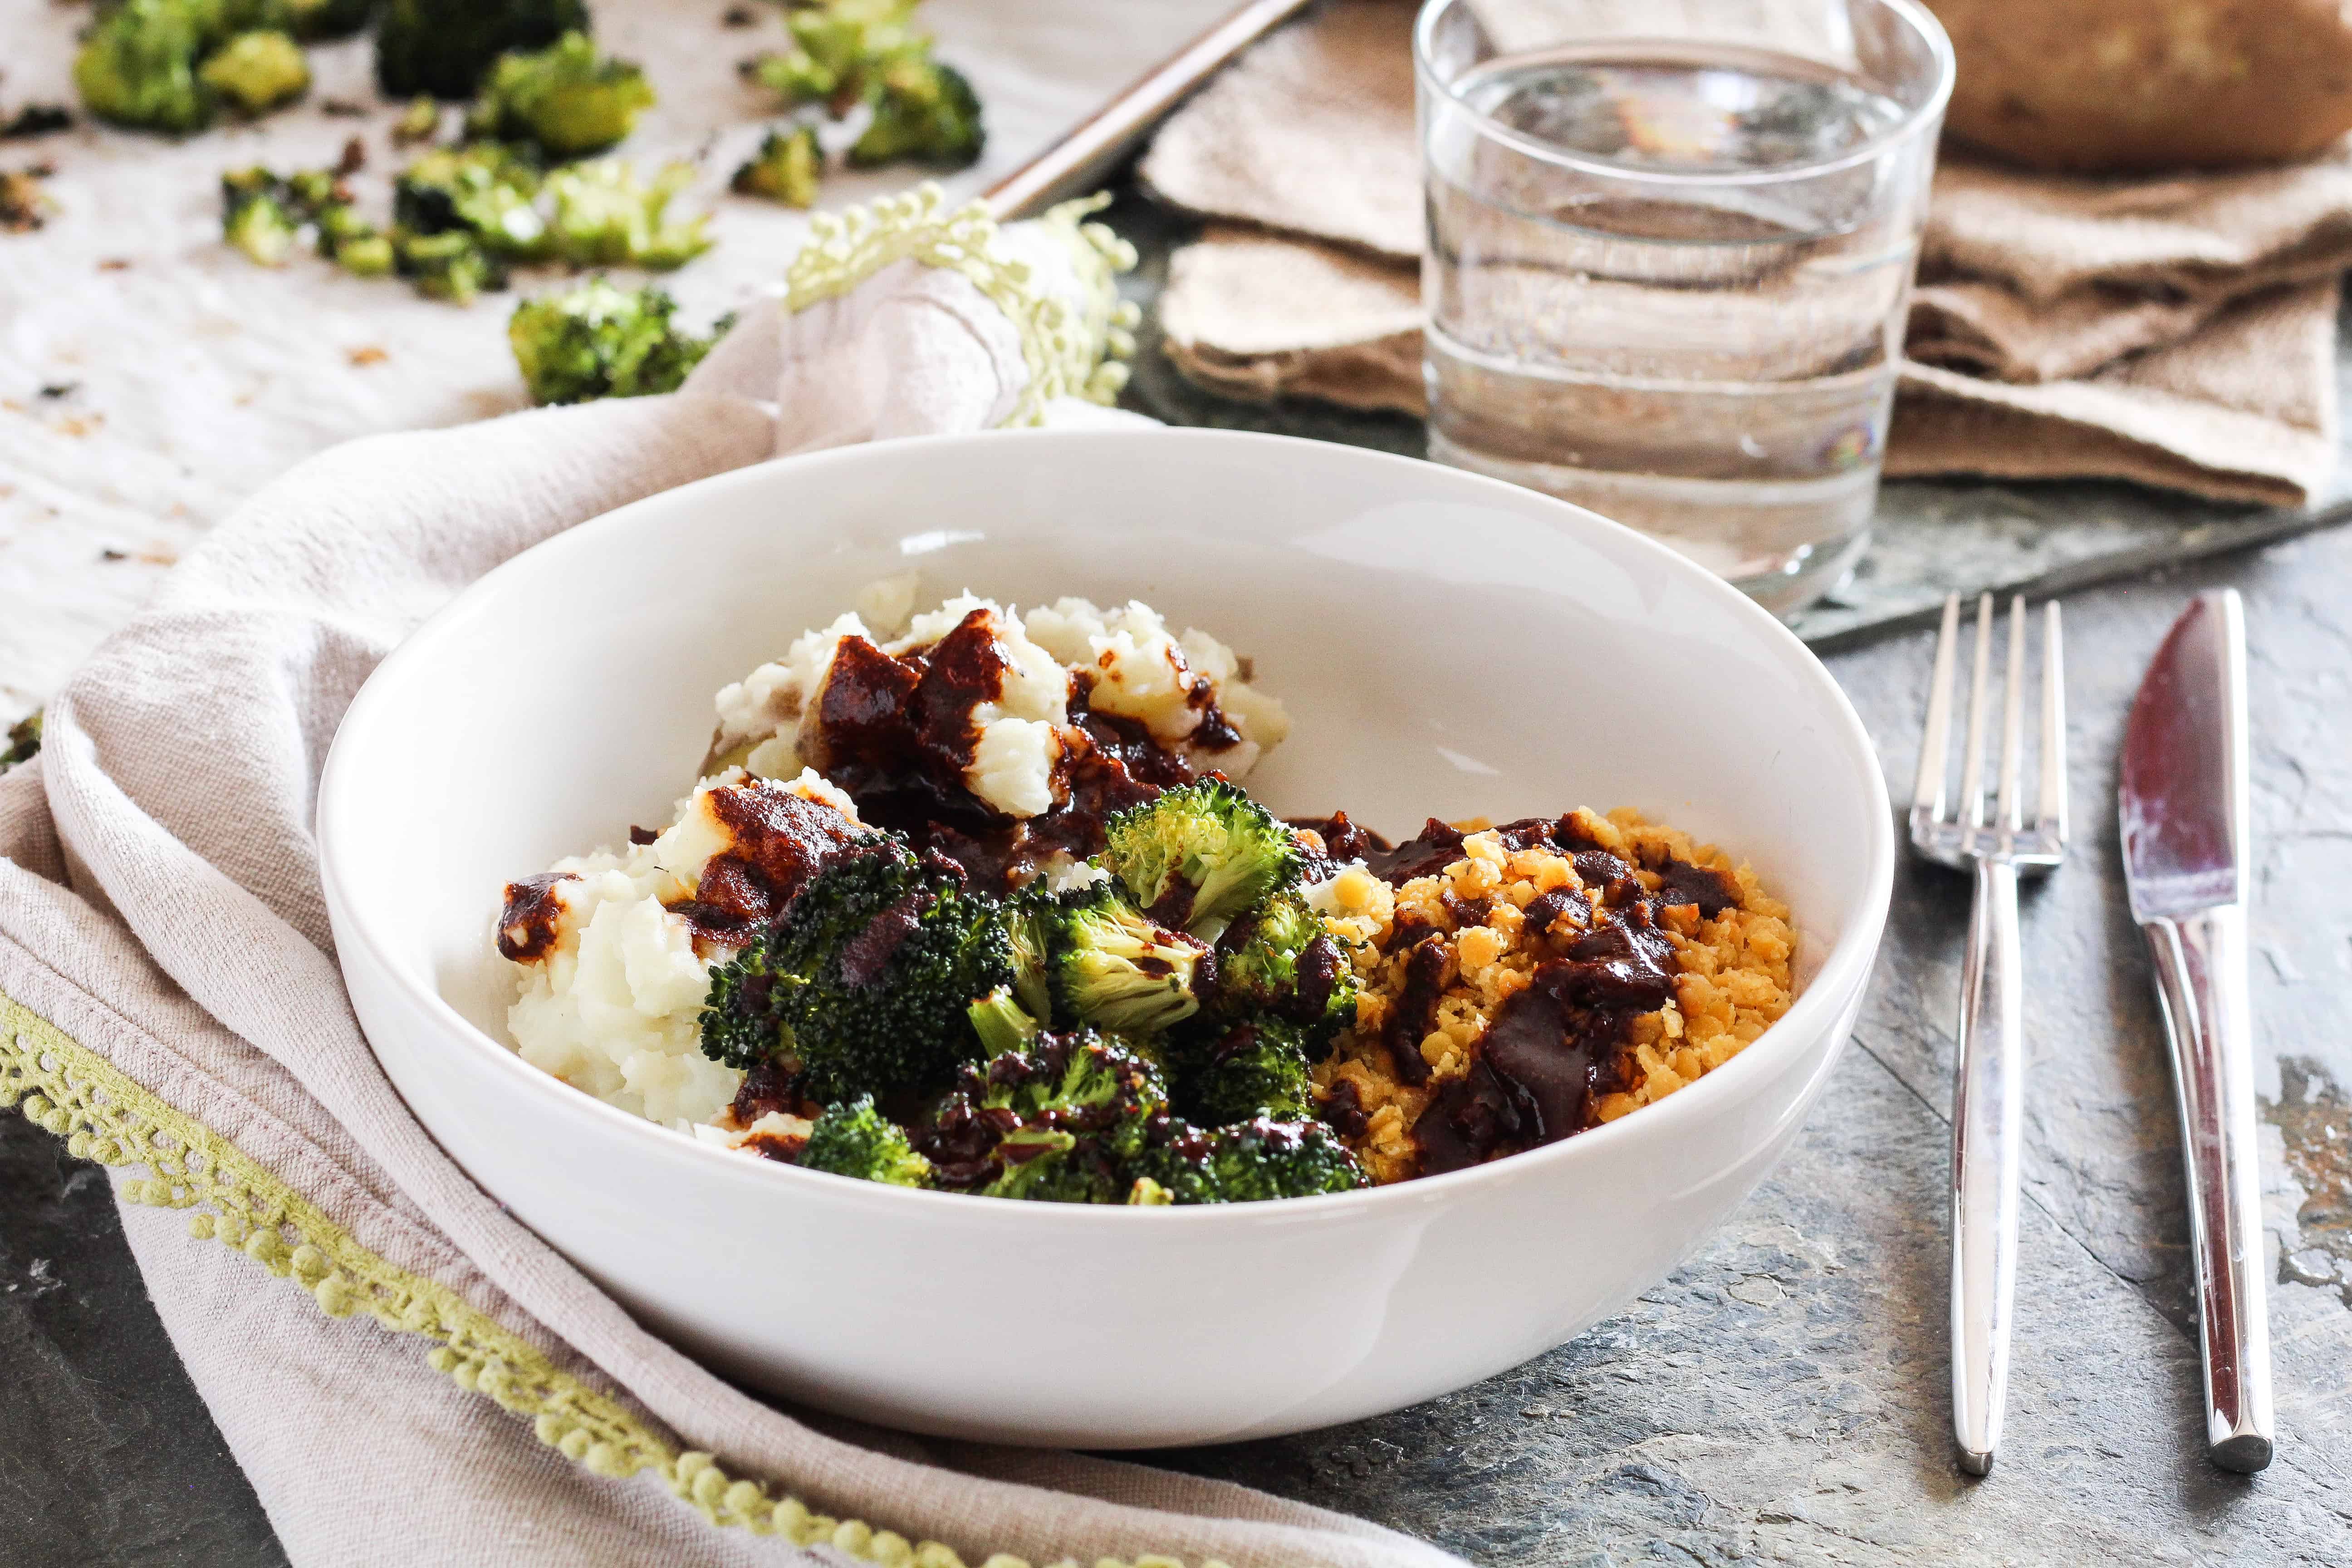 Refuel after a tough workout with nourishing and protein-rich plant-based BBQ Lentil Mashed Potato Bowls with zesty balsamic barbecue sauce.